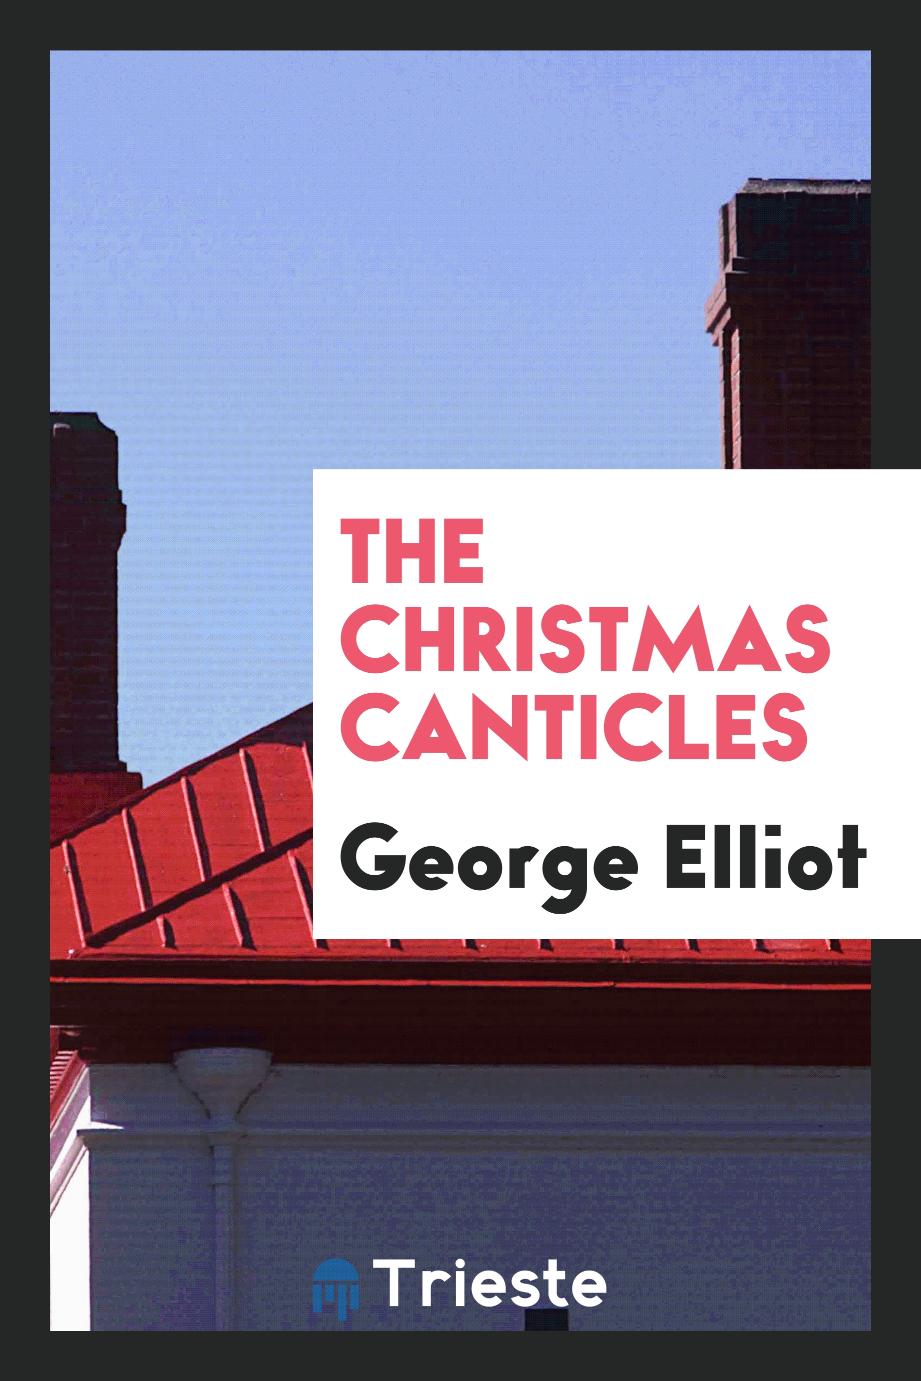 The Christmas canticles